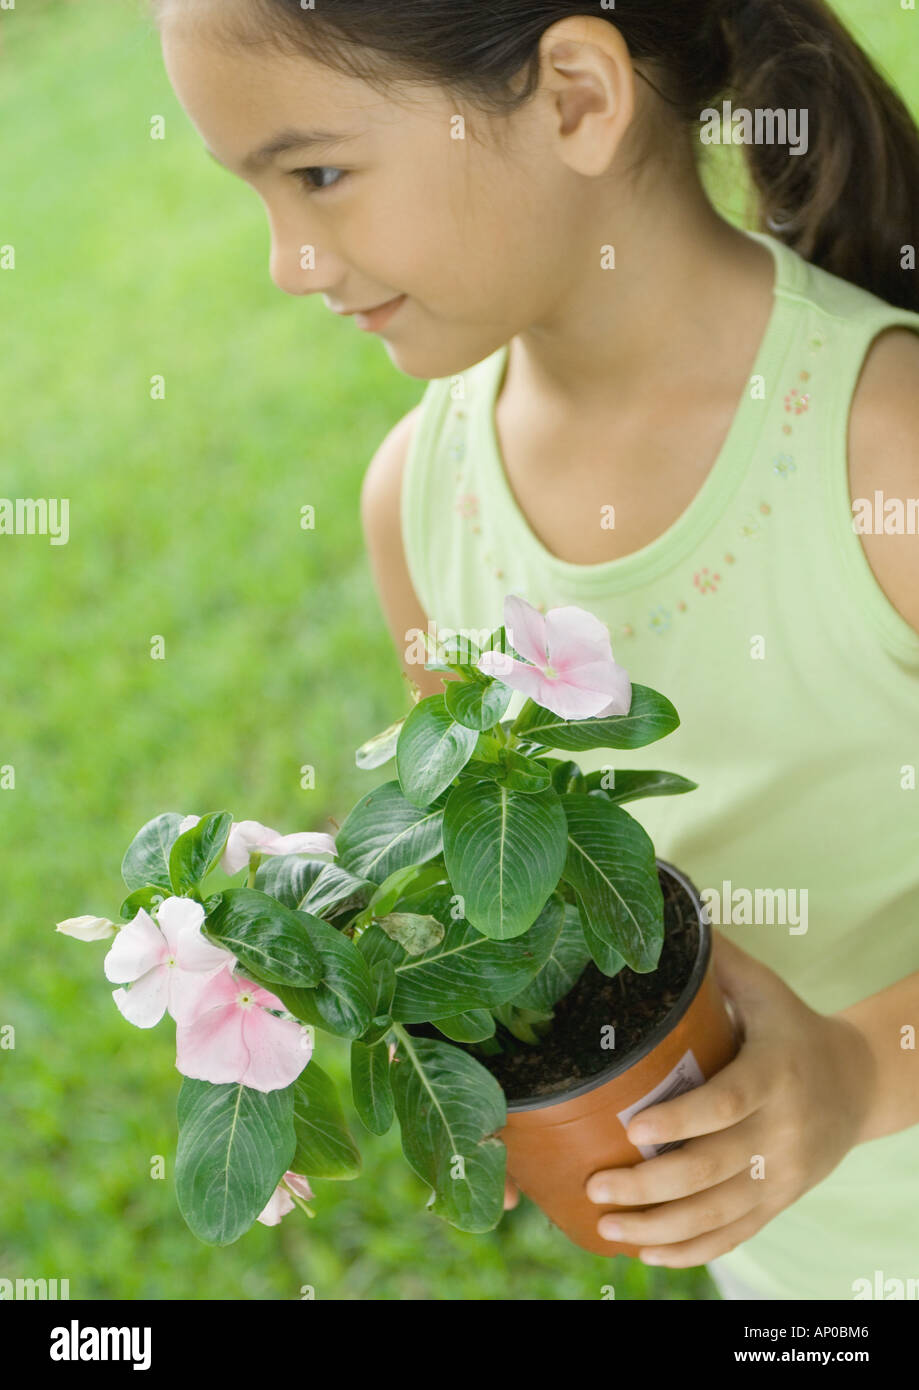 Girl holding potted plant Stock Photo